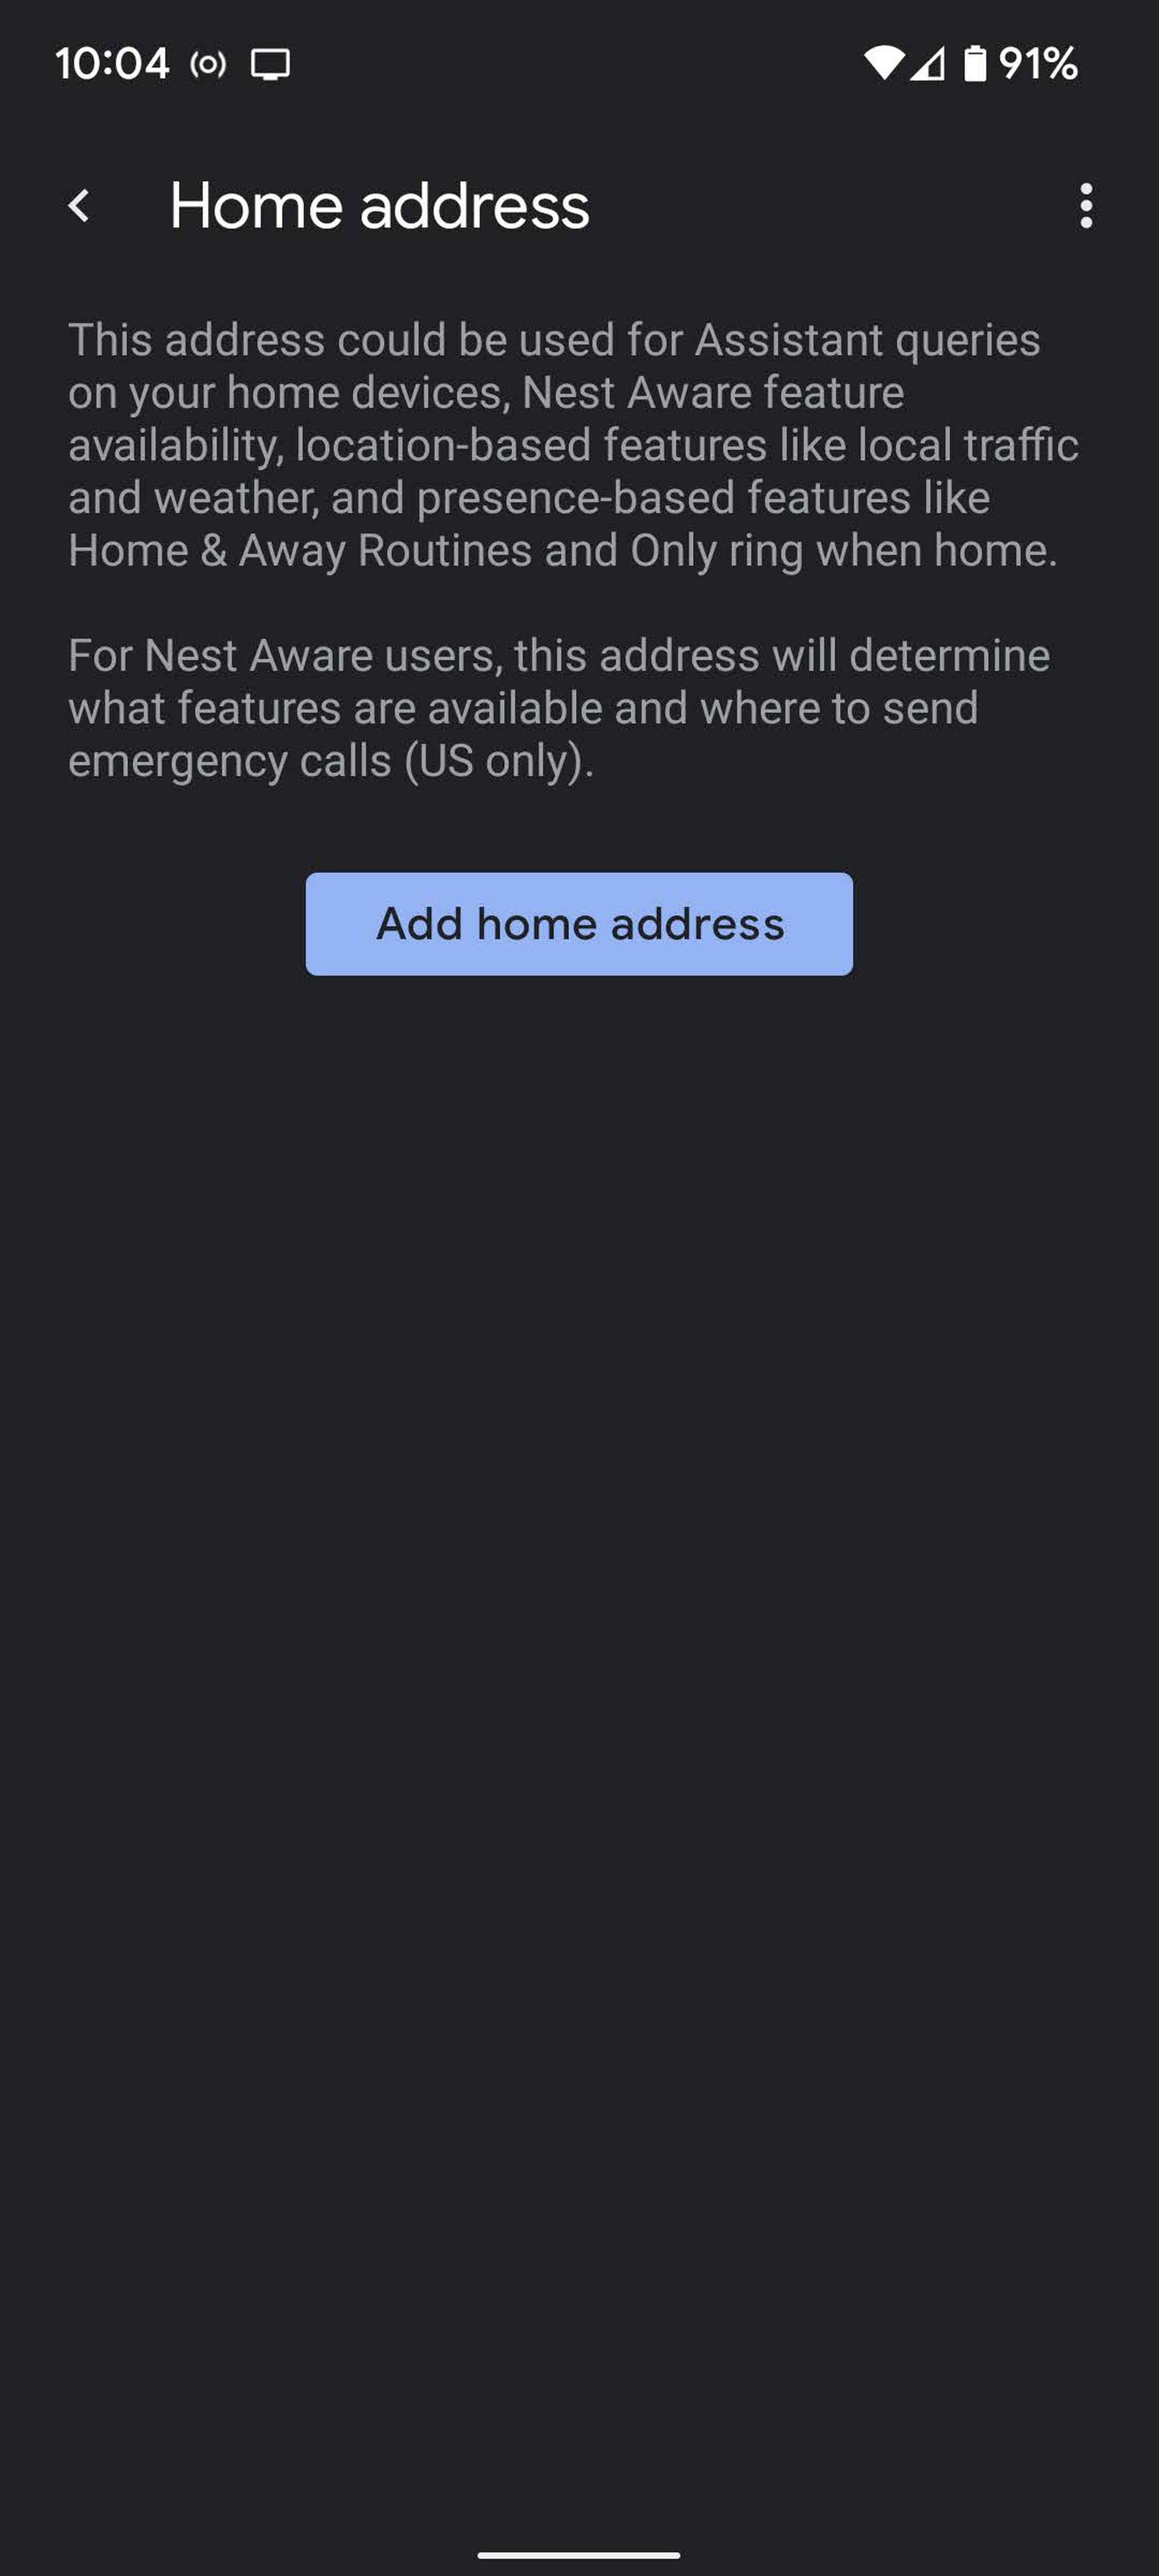 Home address screen with Add Home Address button